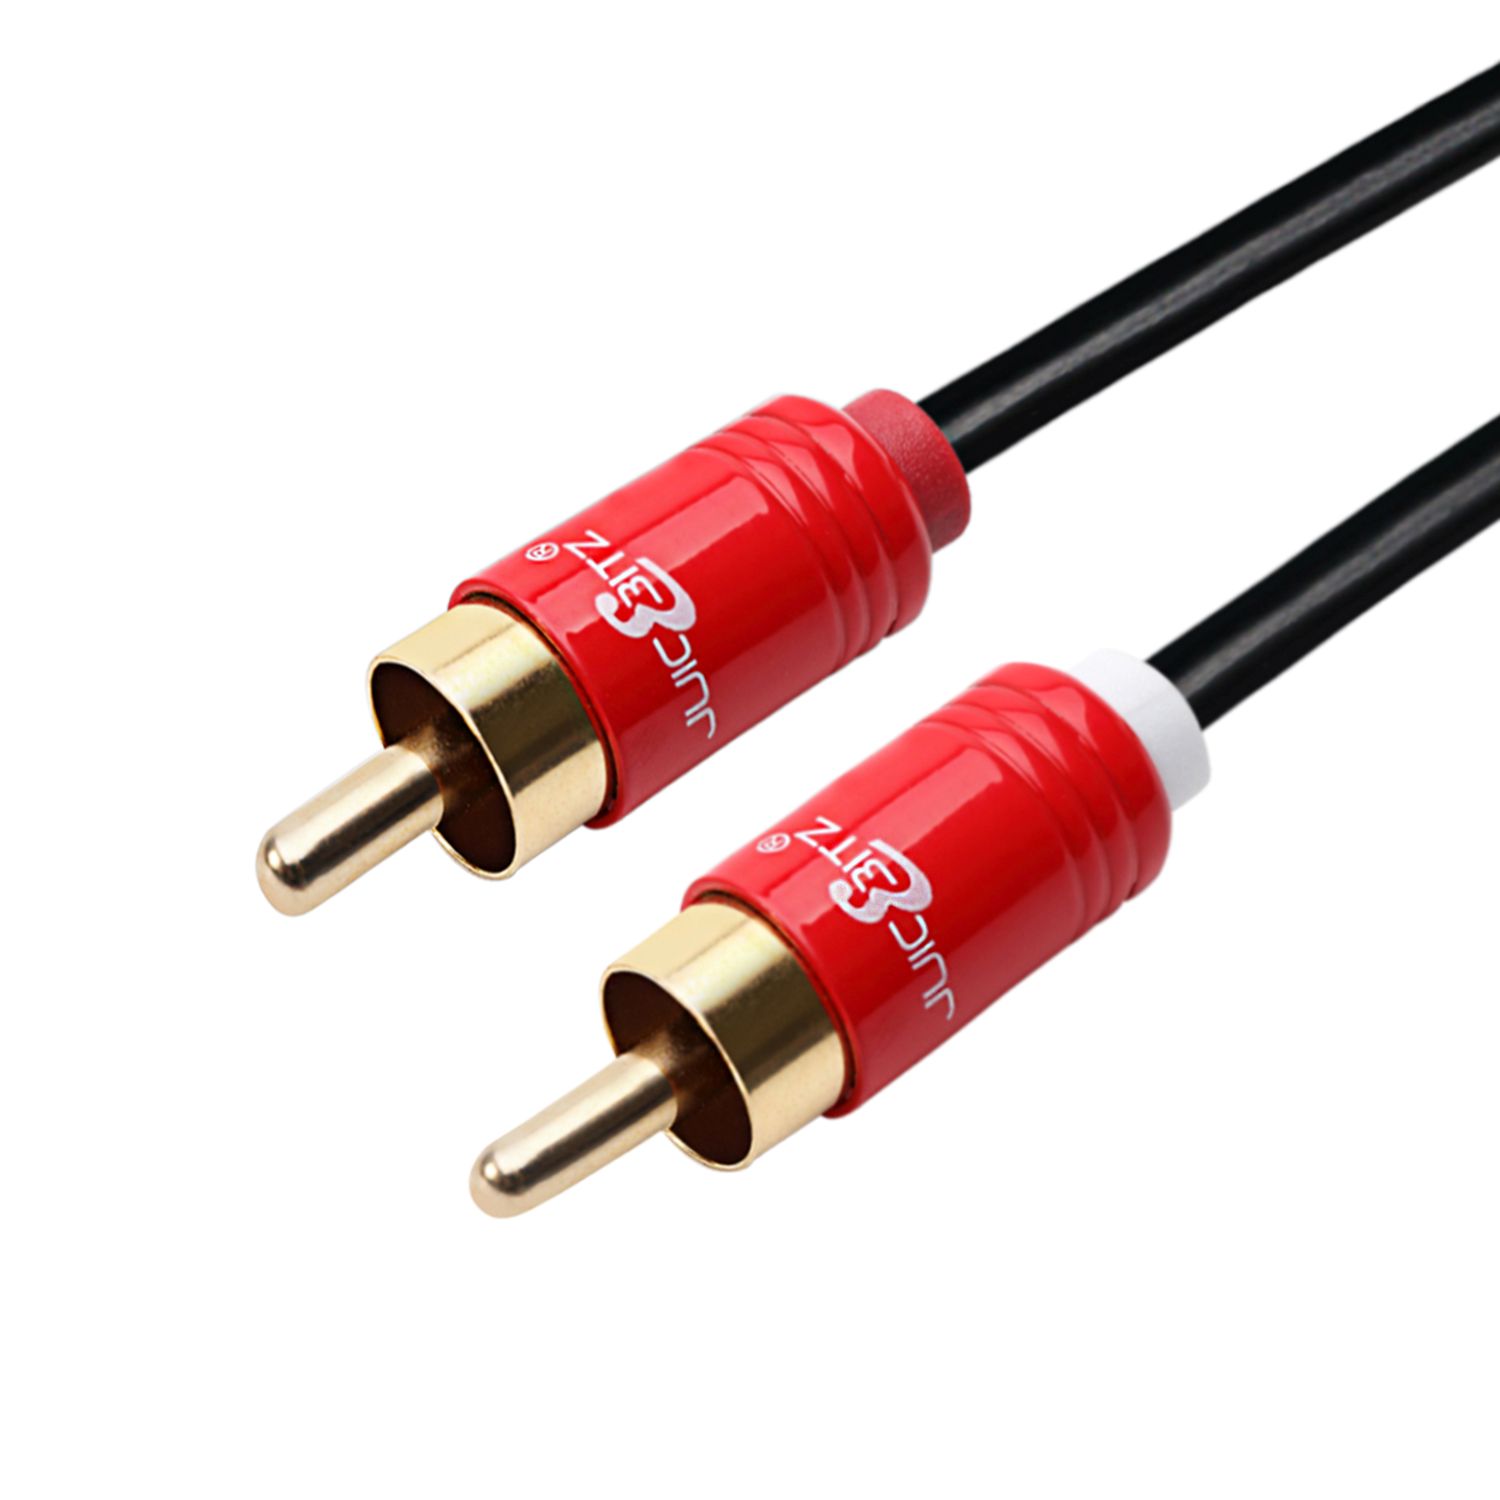 4 way rca cable